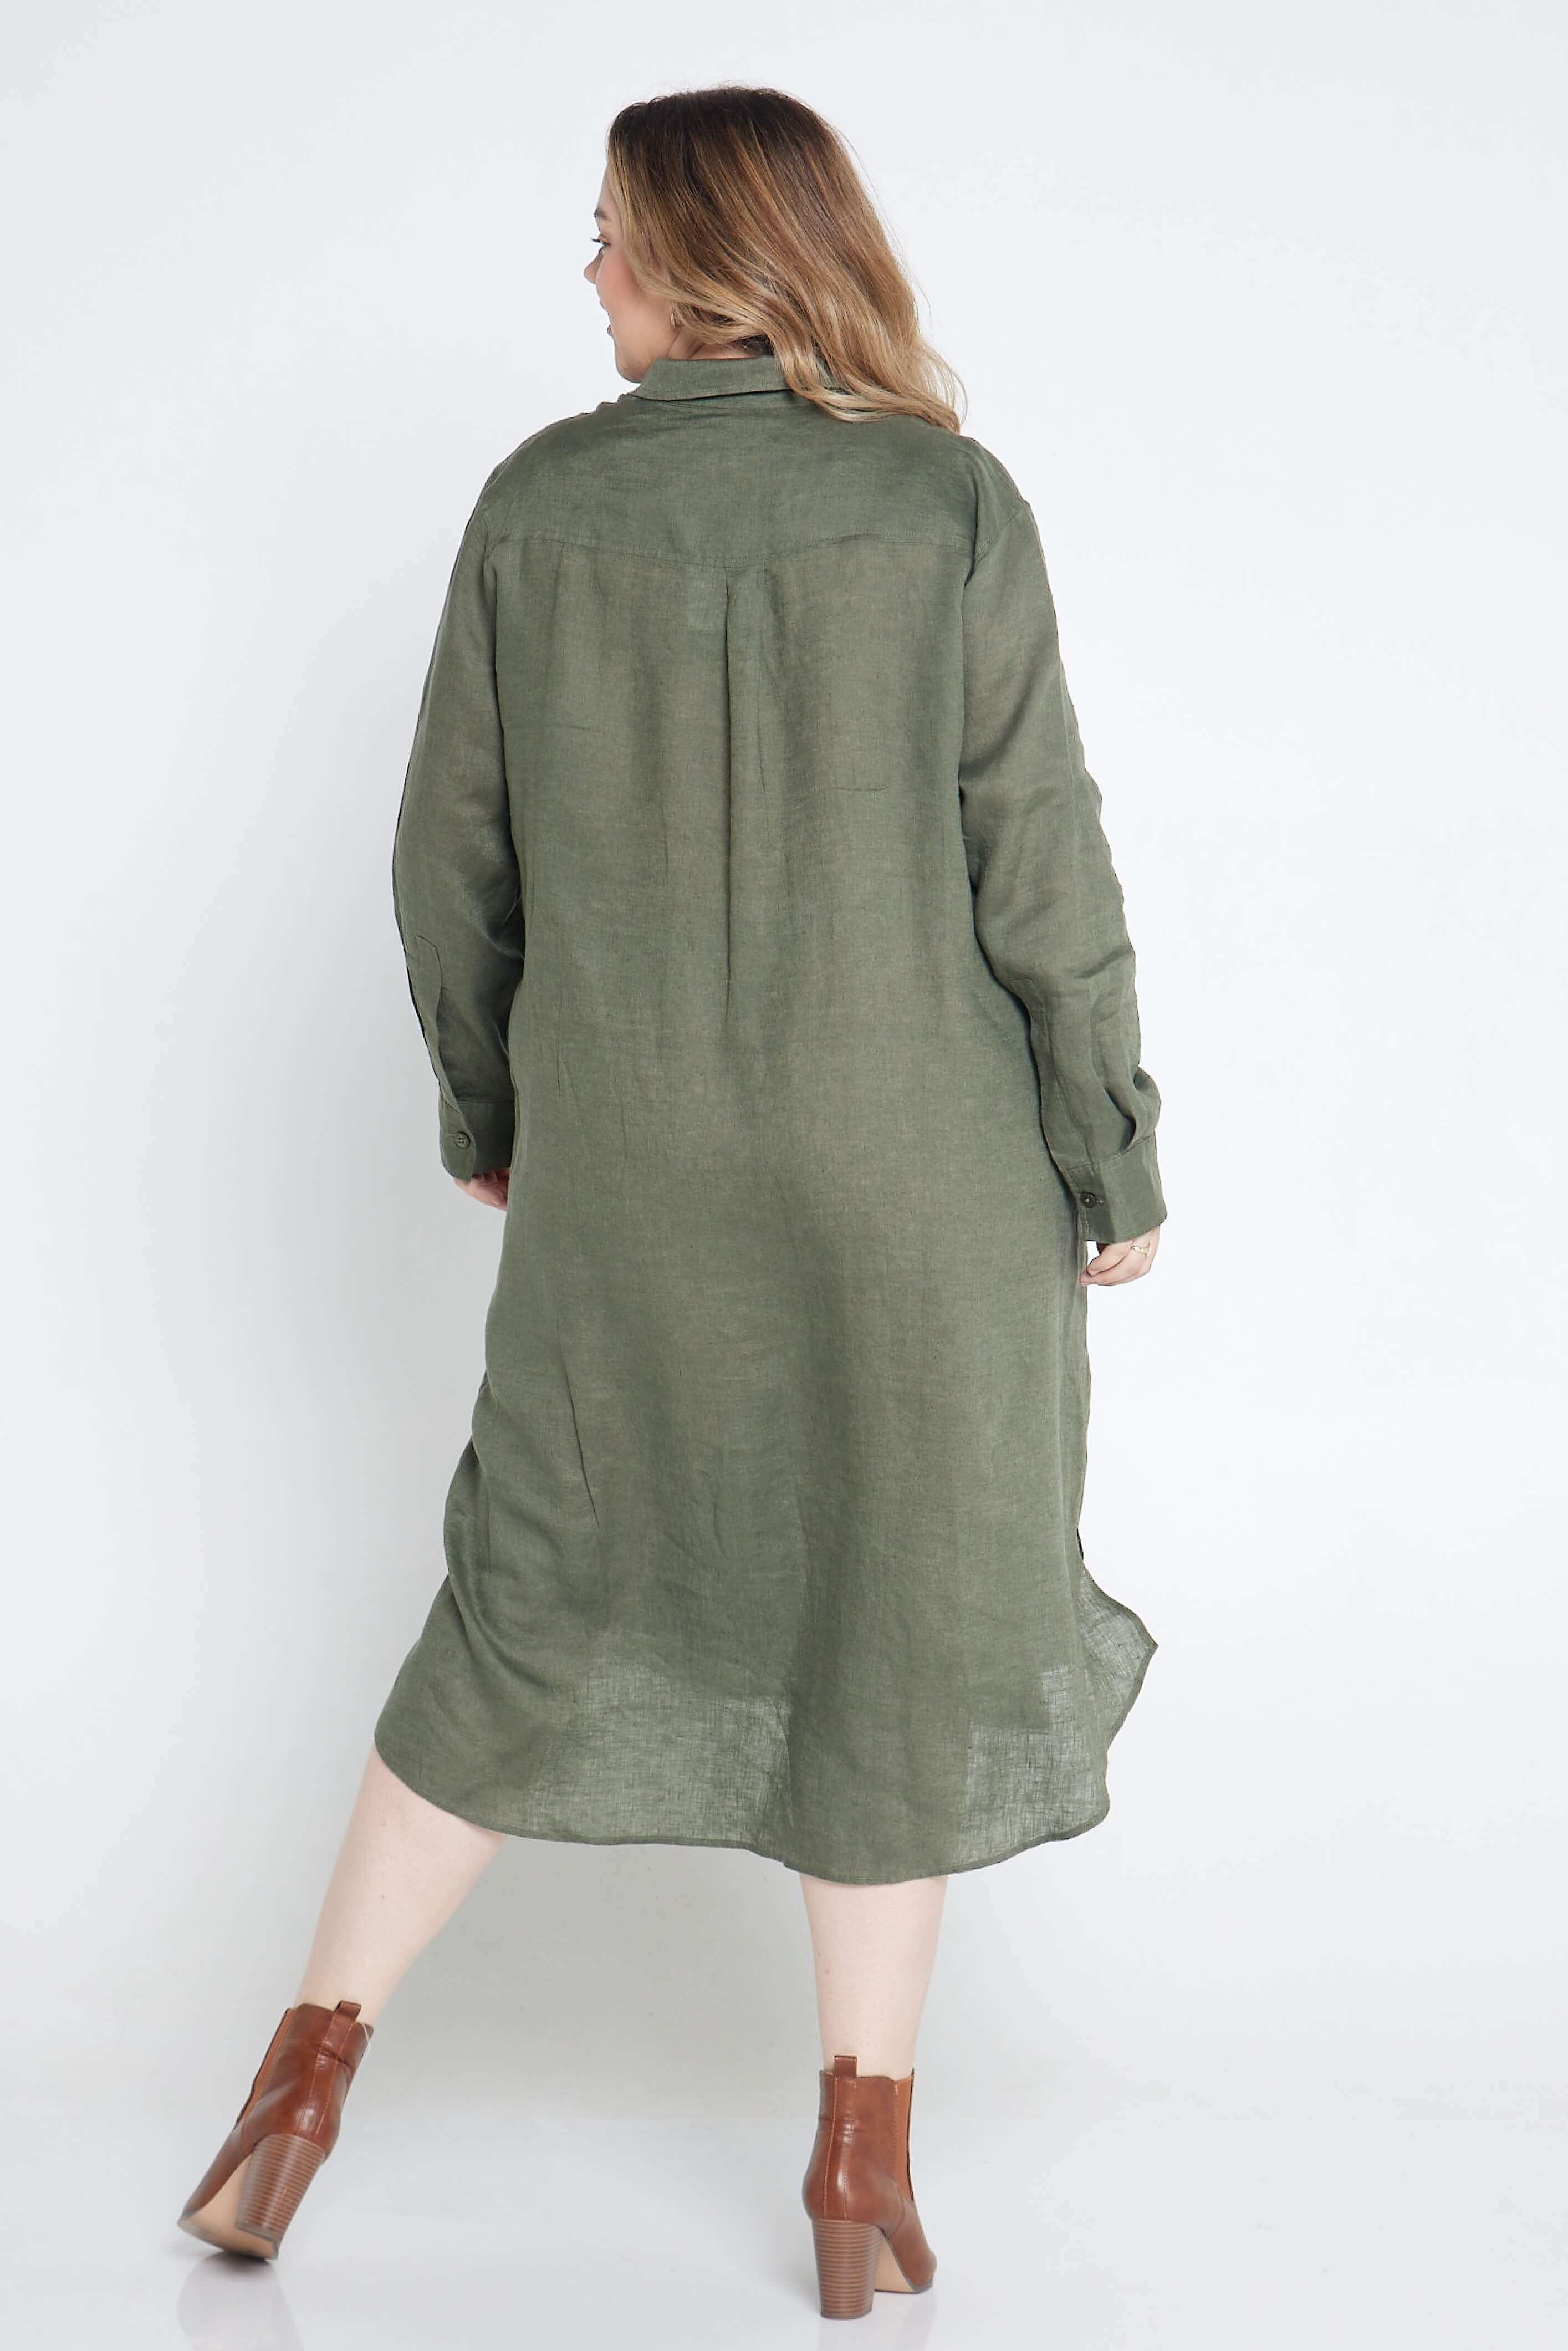 Spinifex Green Everyday Organic Linen Dress - Outback Linen Co